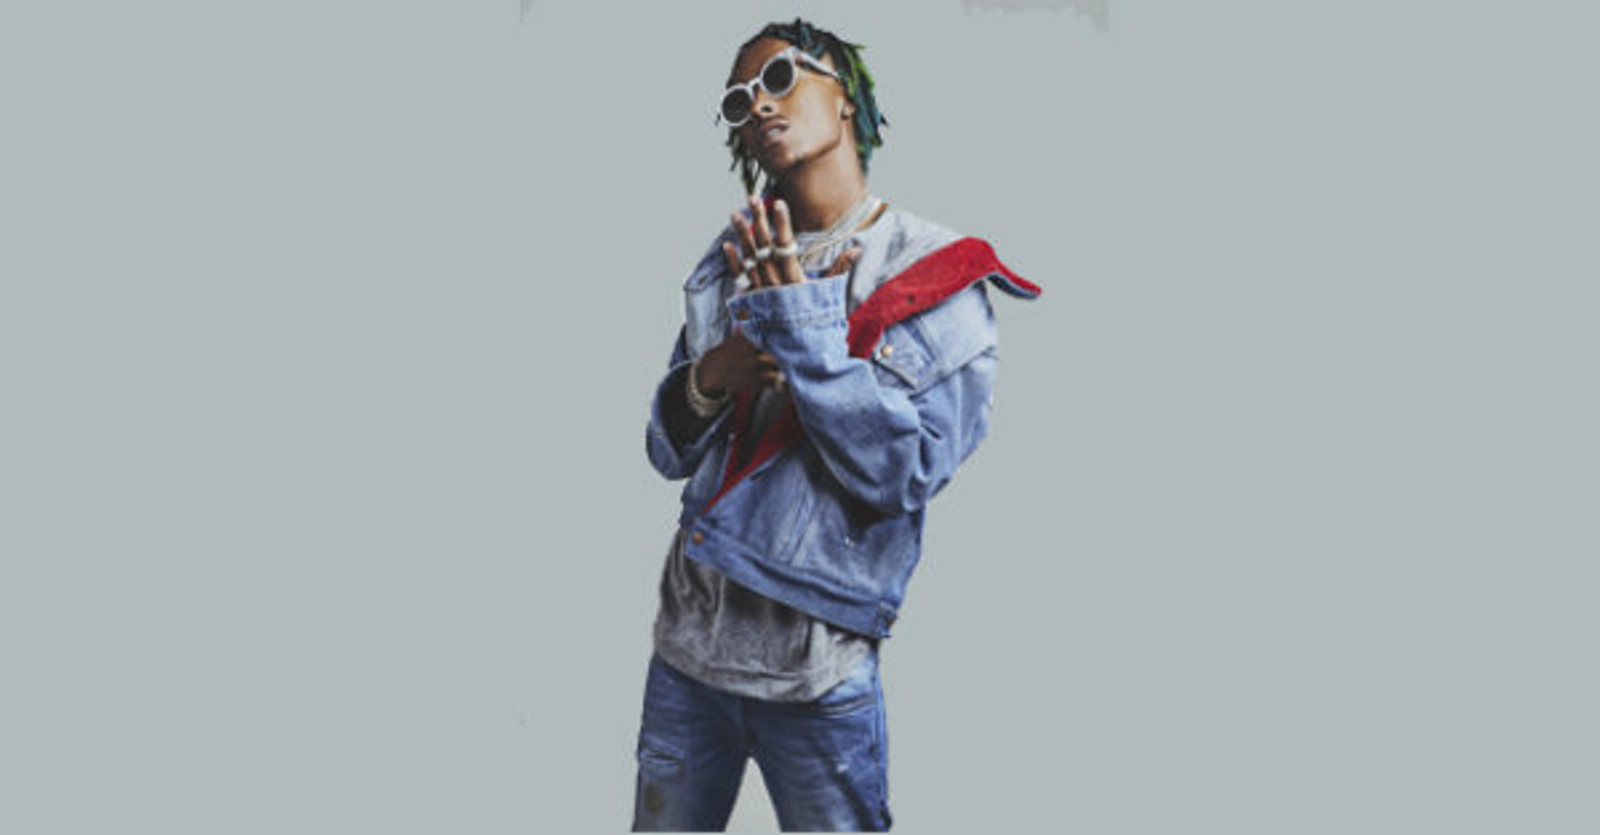  Win tickets to see Rich the Kid at the Pima County Fair  - Thumbnail Image